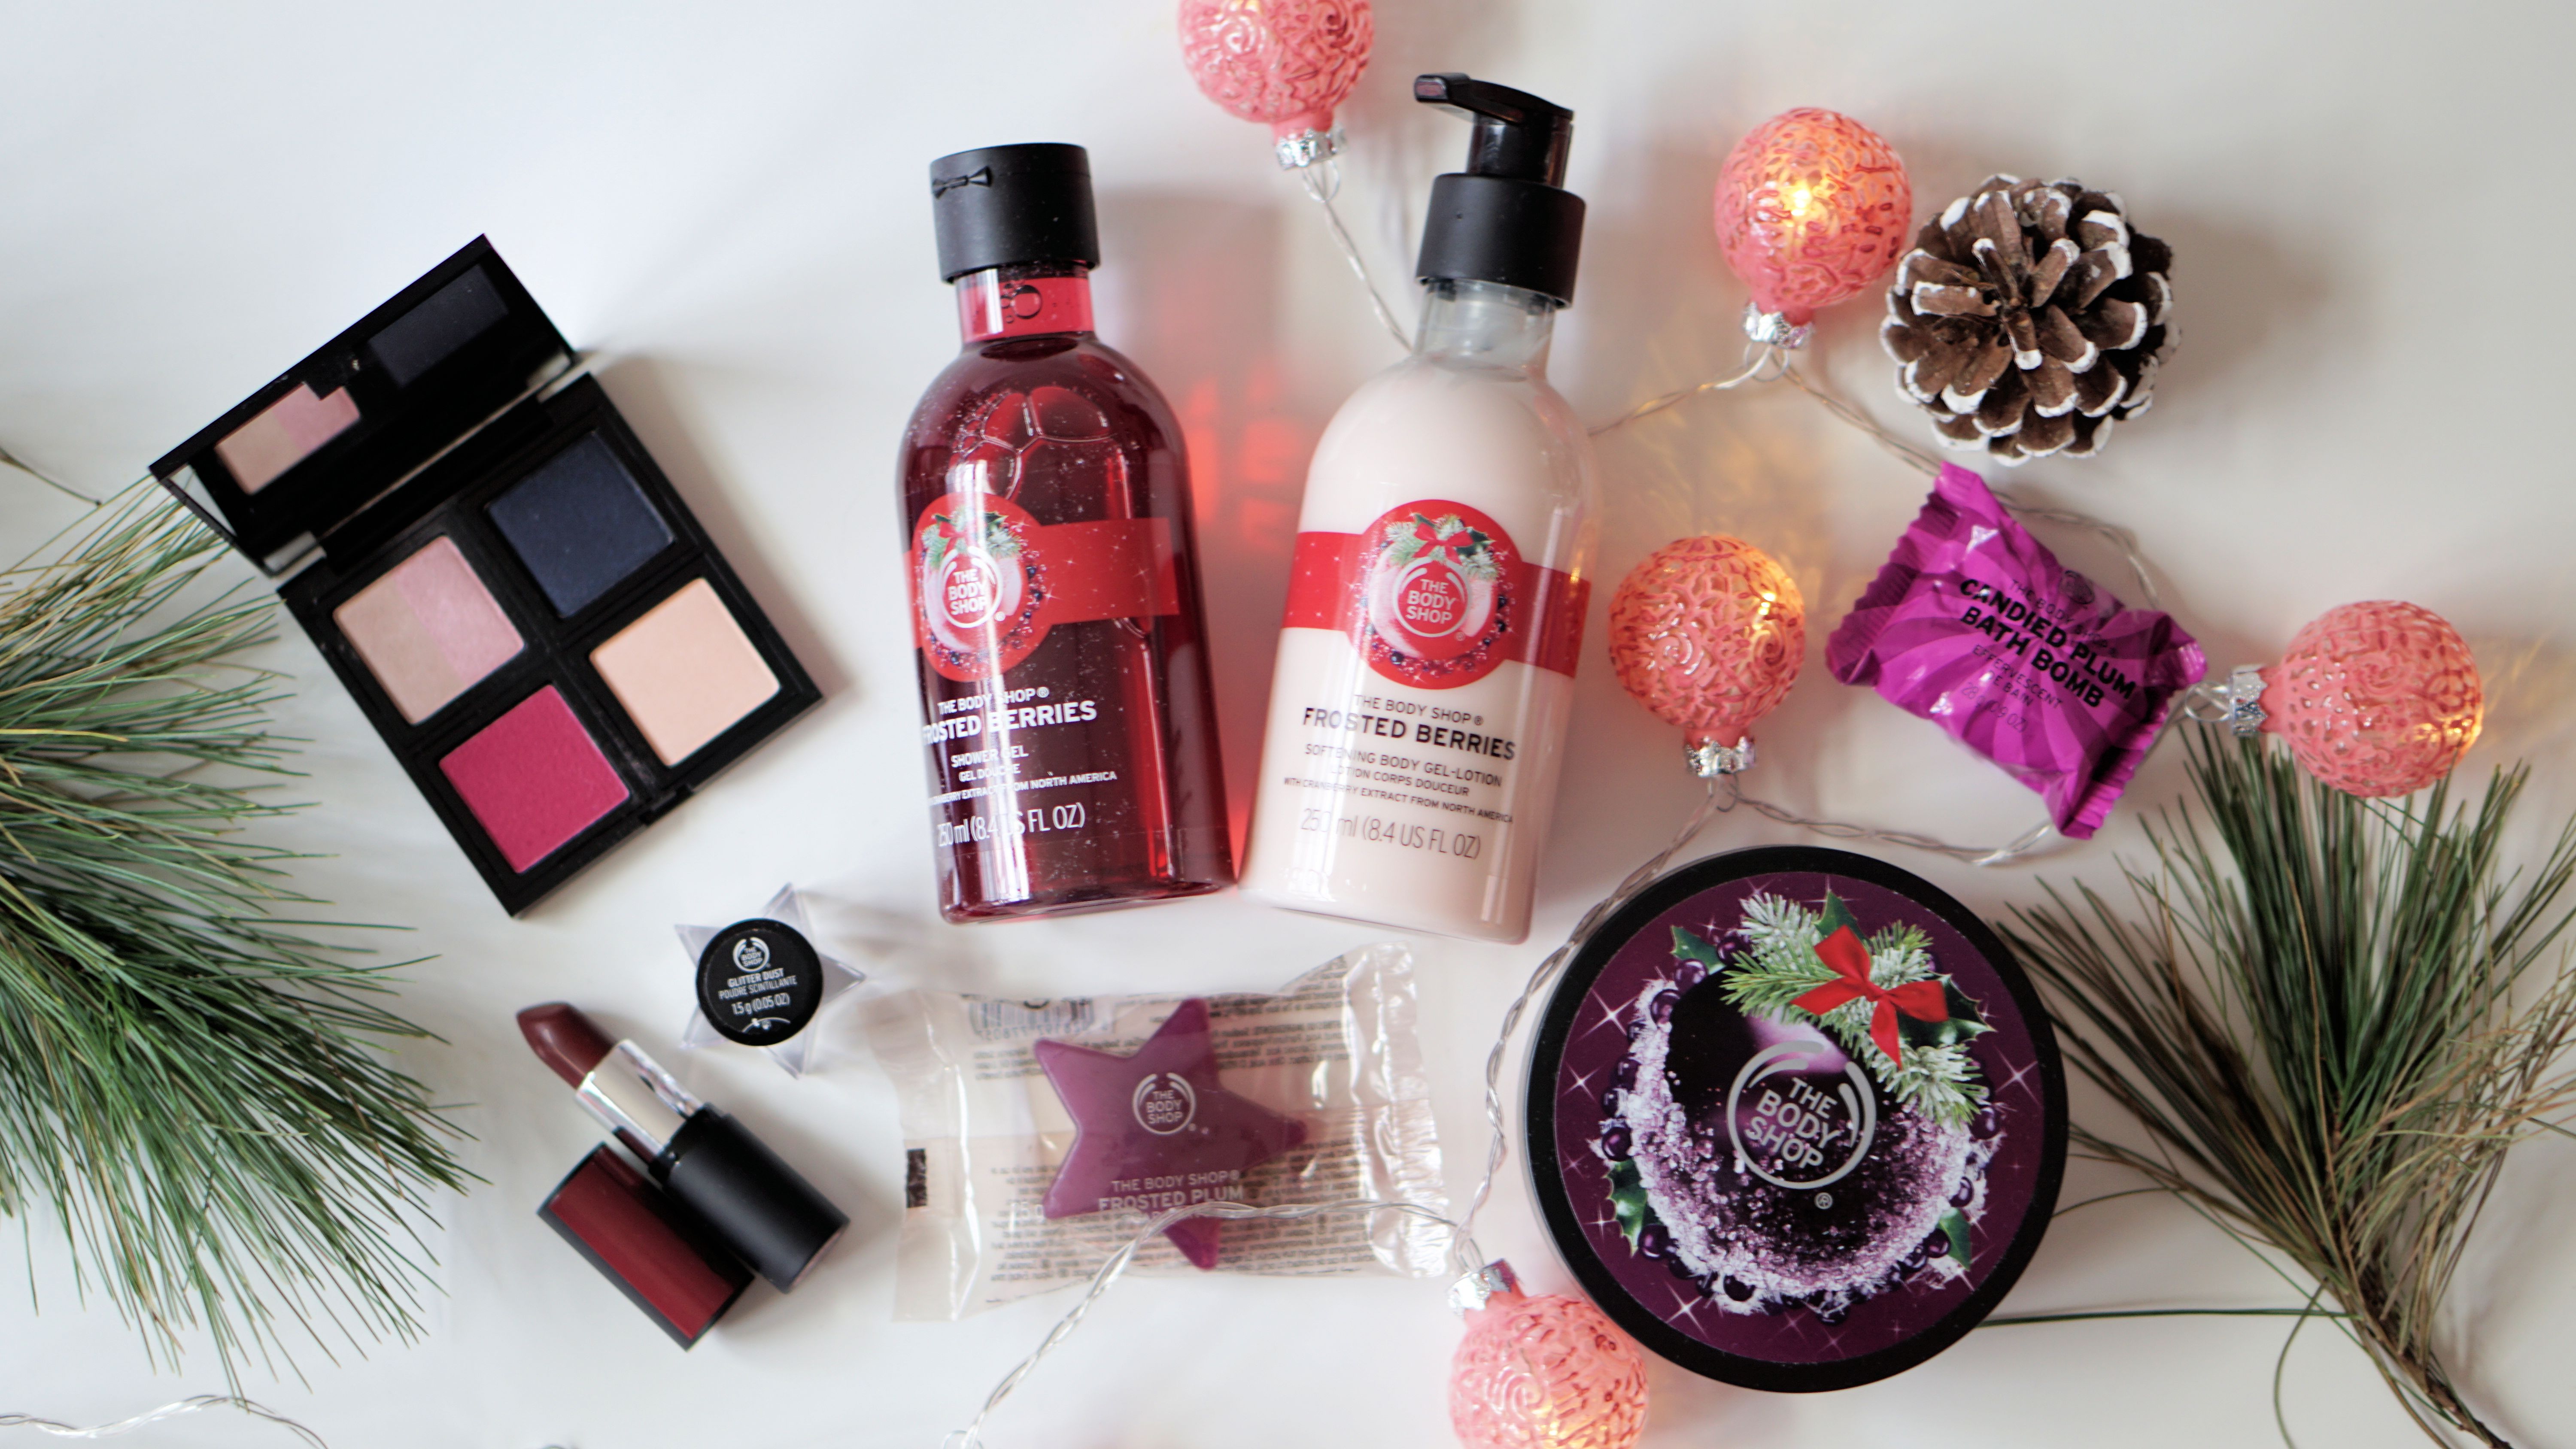 XMAS WITH THE BODY SHOP